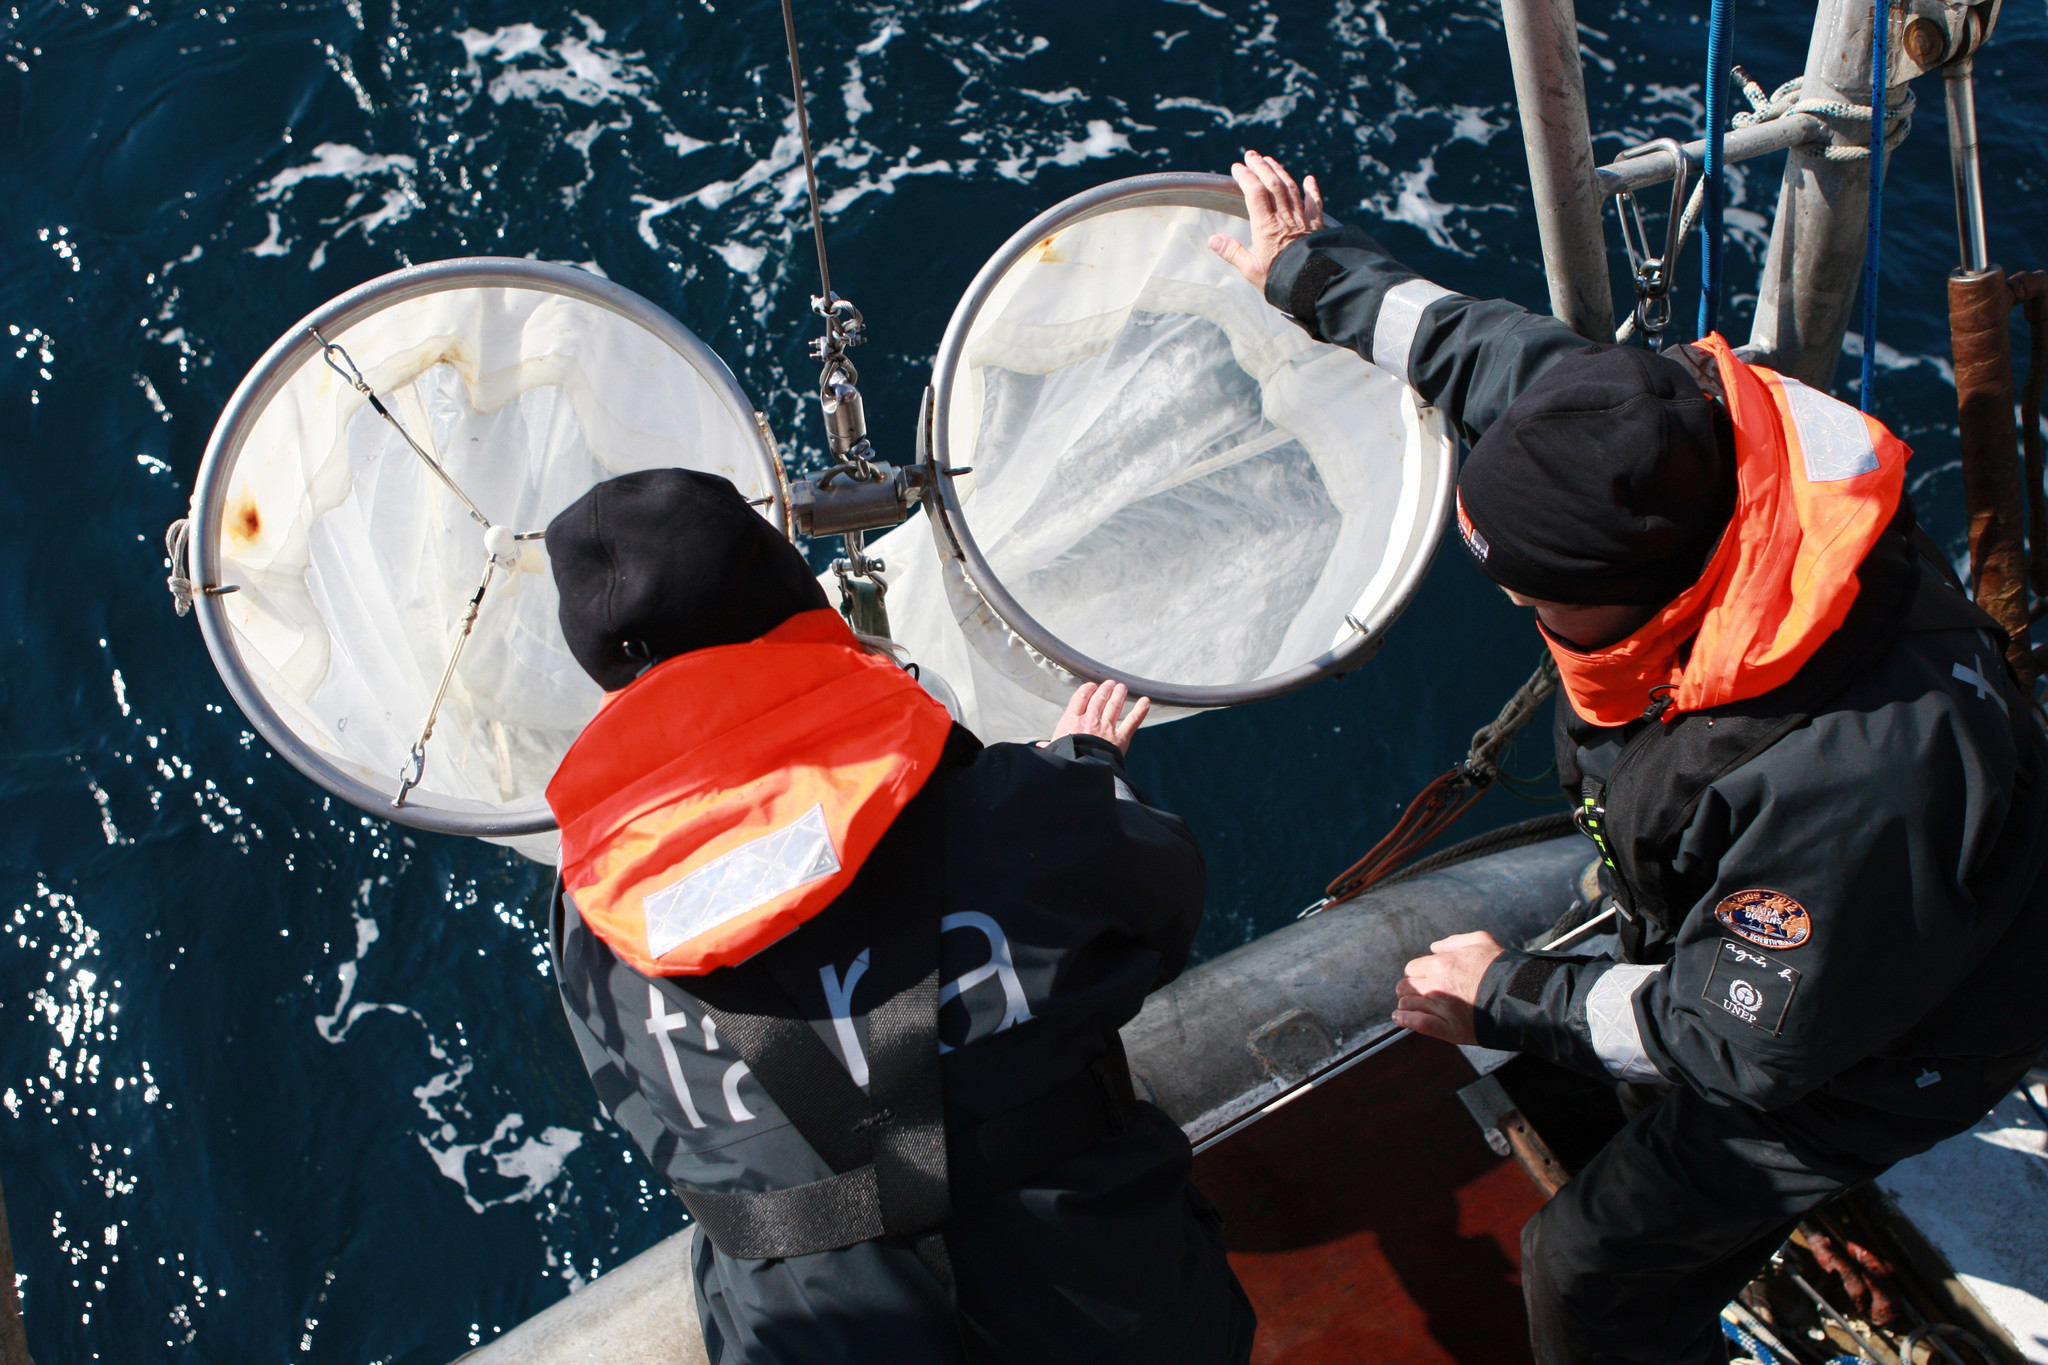 Scientists lower nets into the water to collect plankton and microplastics.